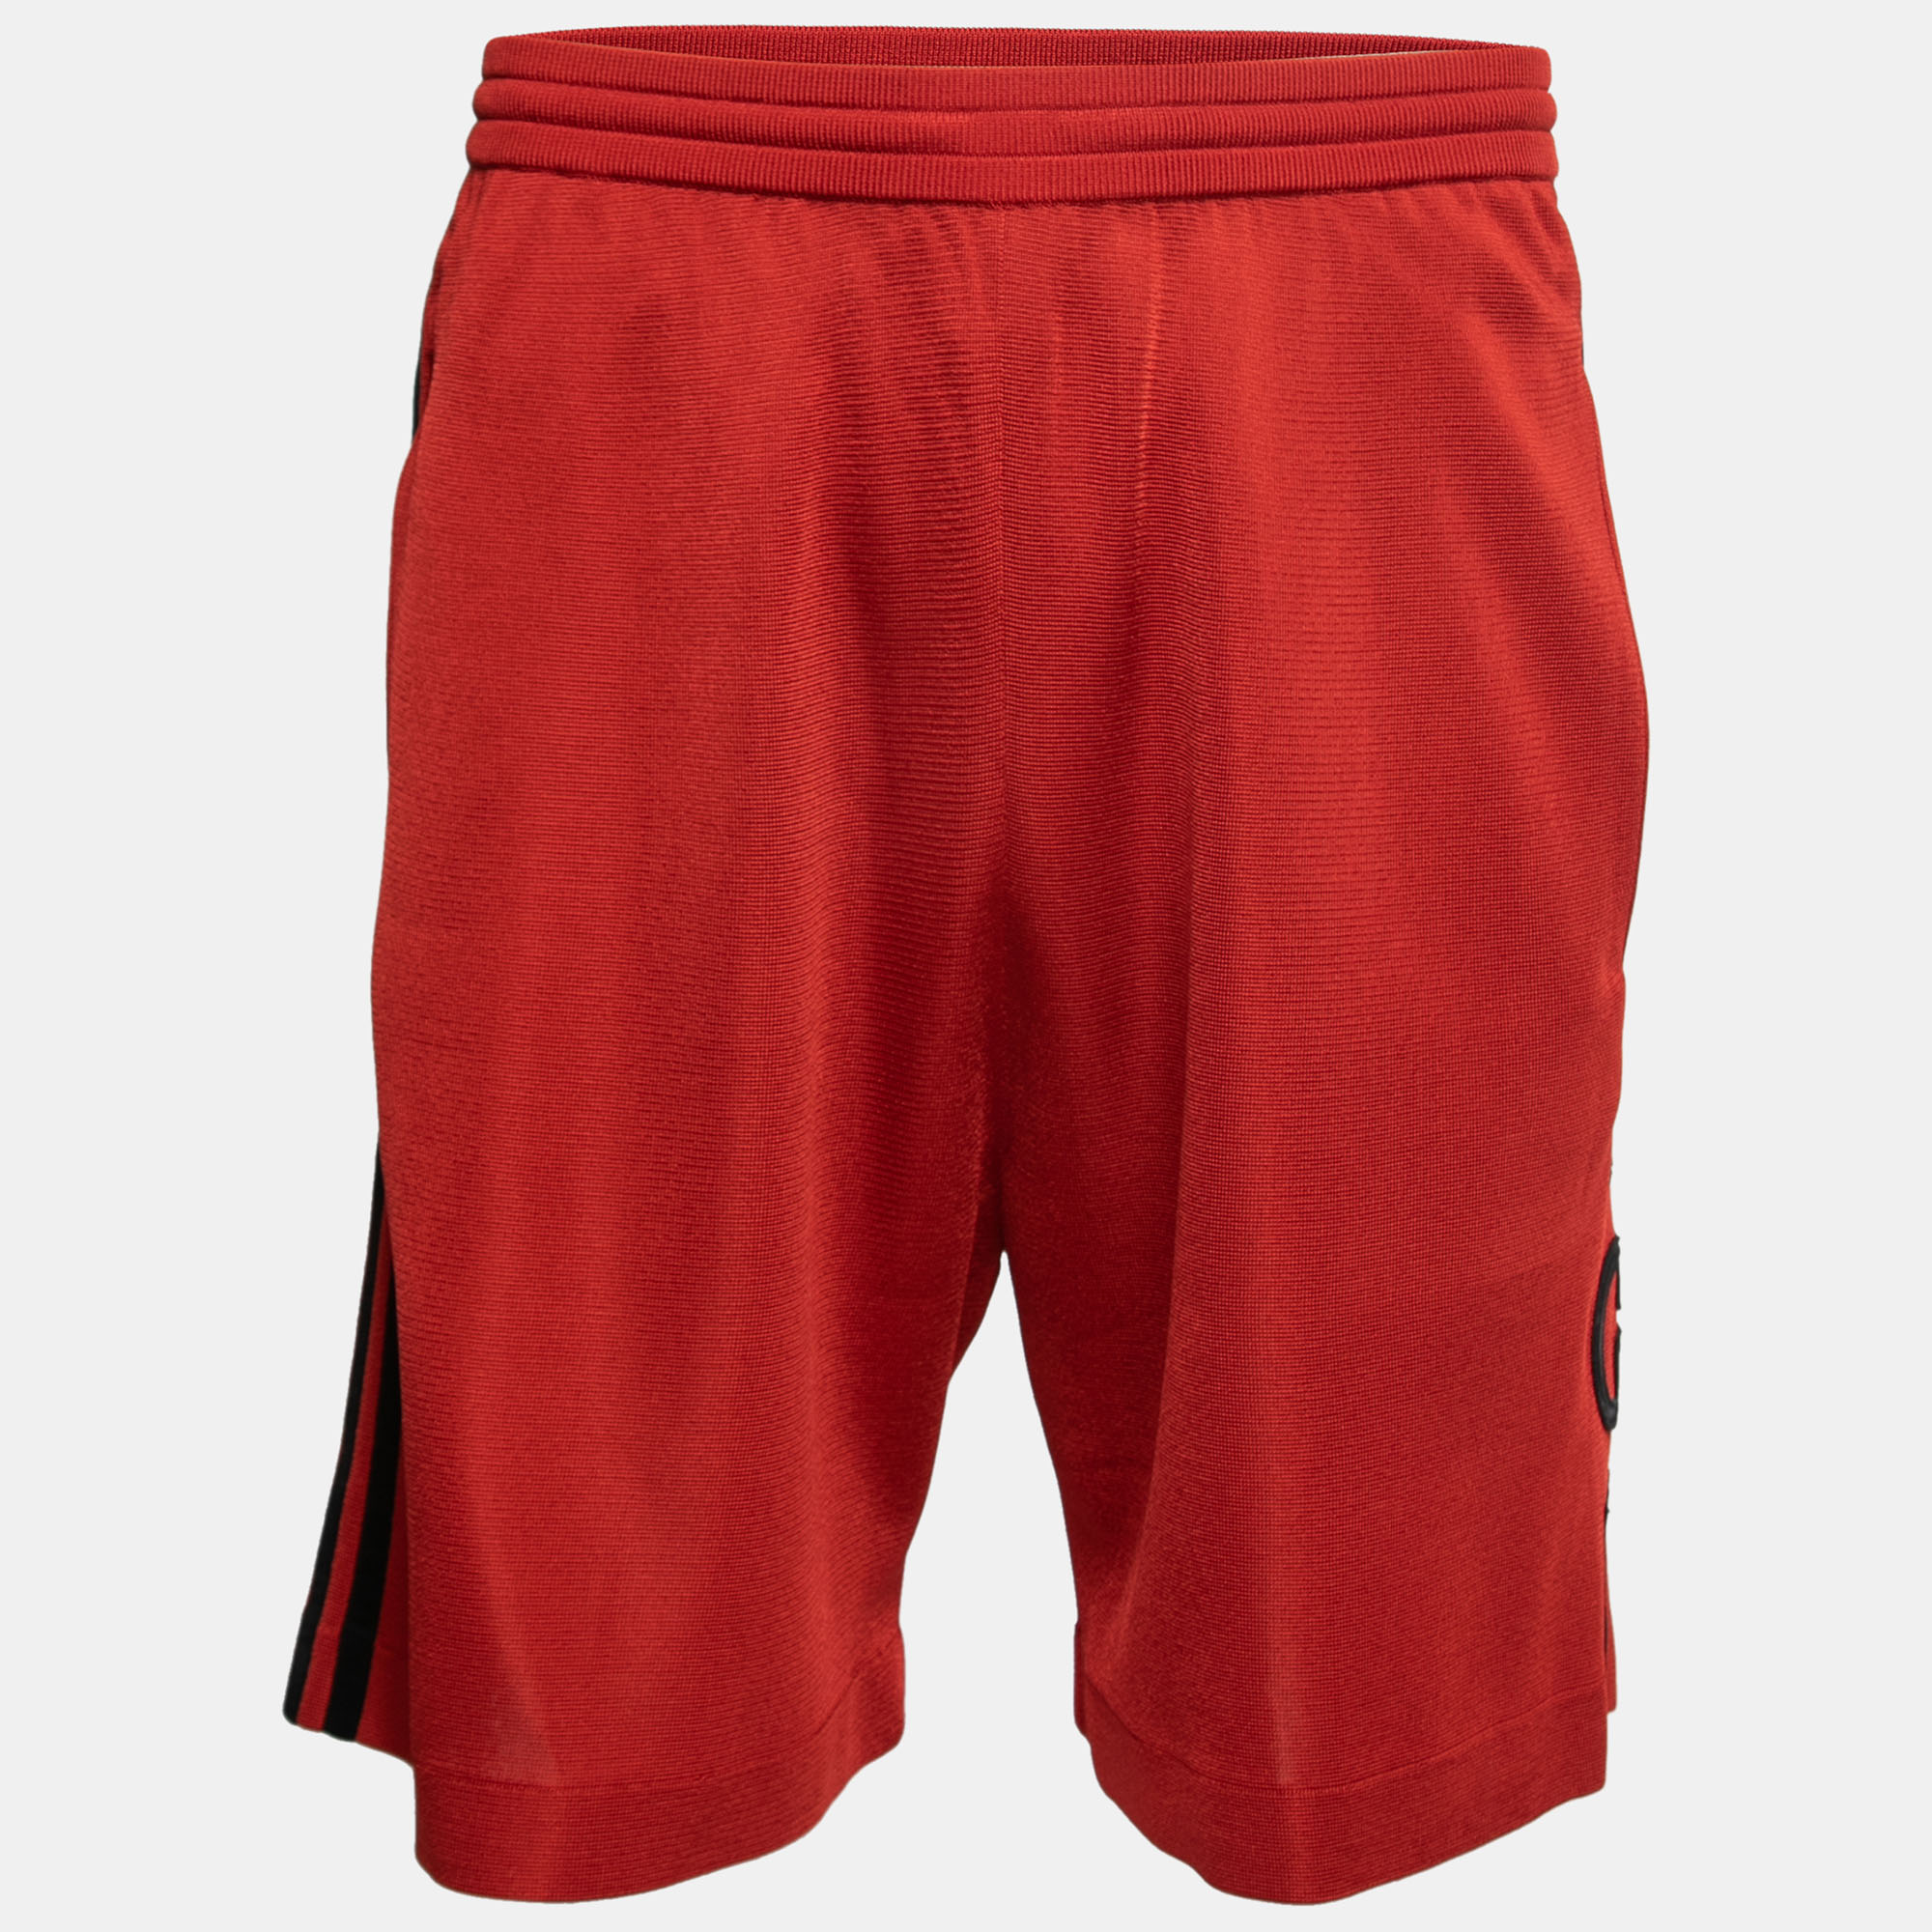 These shorts by Gucci X adidas are a comfy and stylish pick. They feature the triple adidas stripes and the Interlocking G logo. Easy to style and relaxed in appearance these shorts will be your favorite